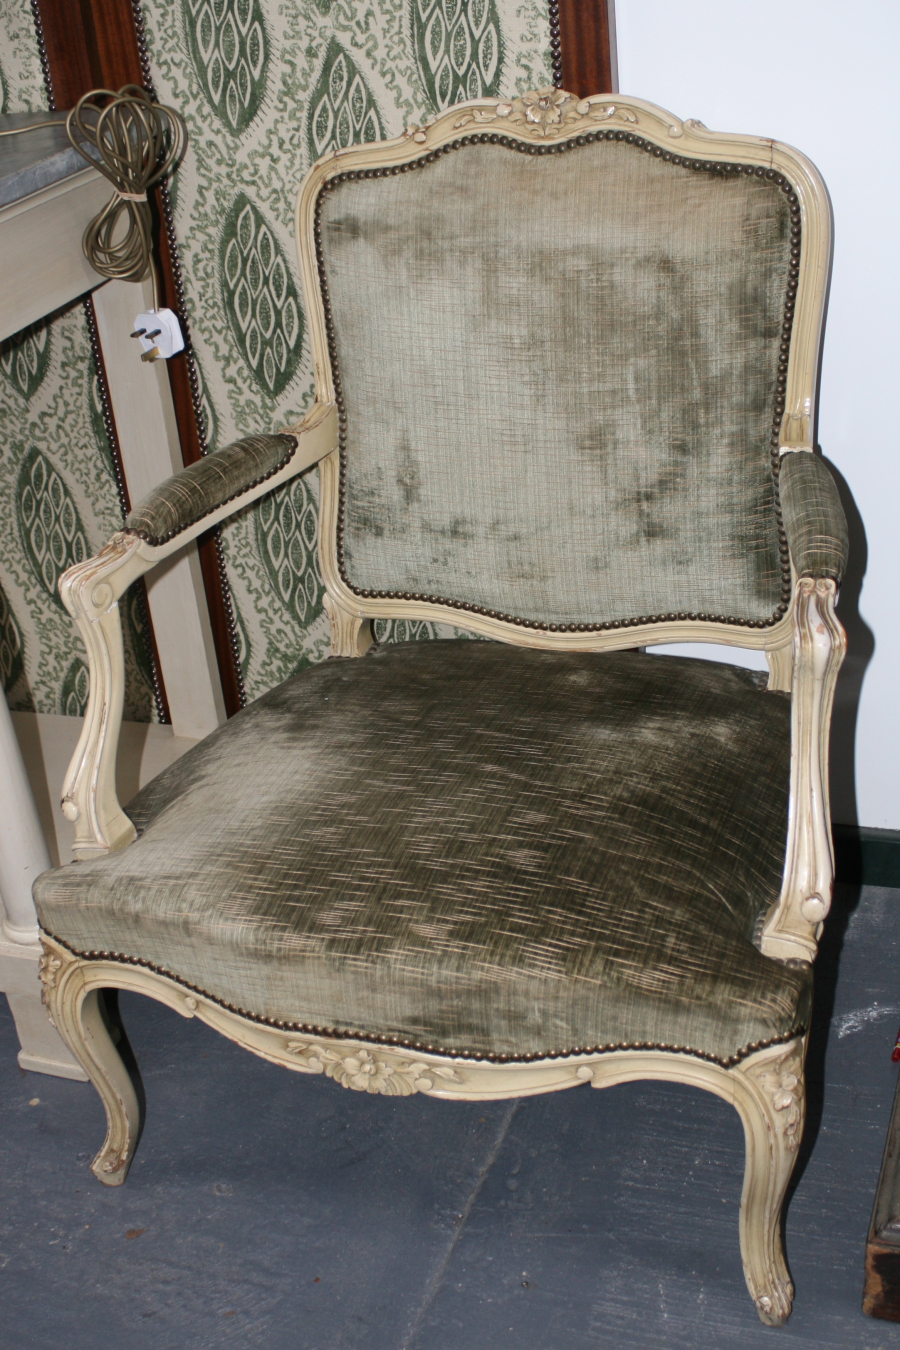 A PAIR OF LOUIS XV STYLE FRENCH FAUTEIL ARMCHAIRS